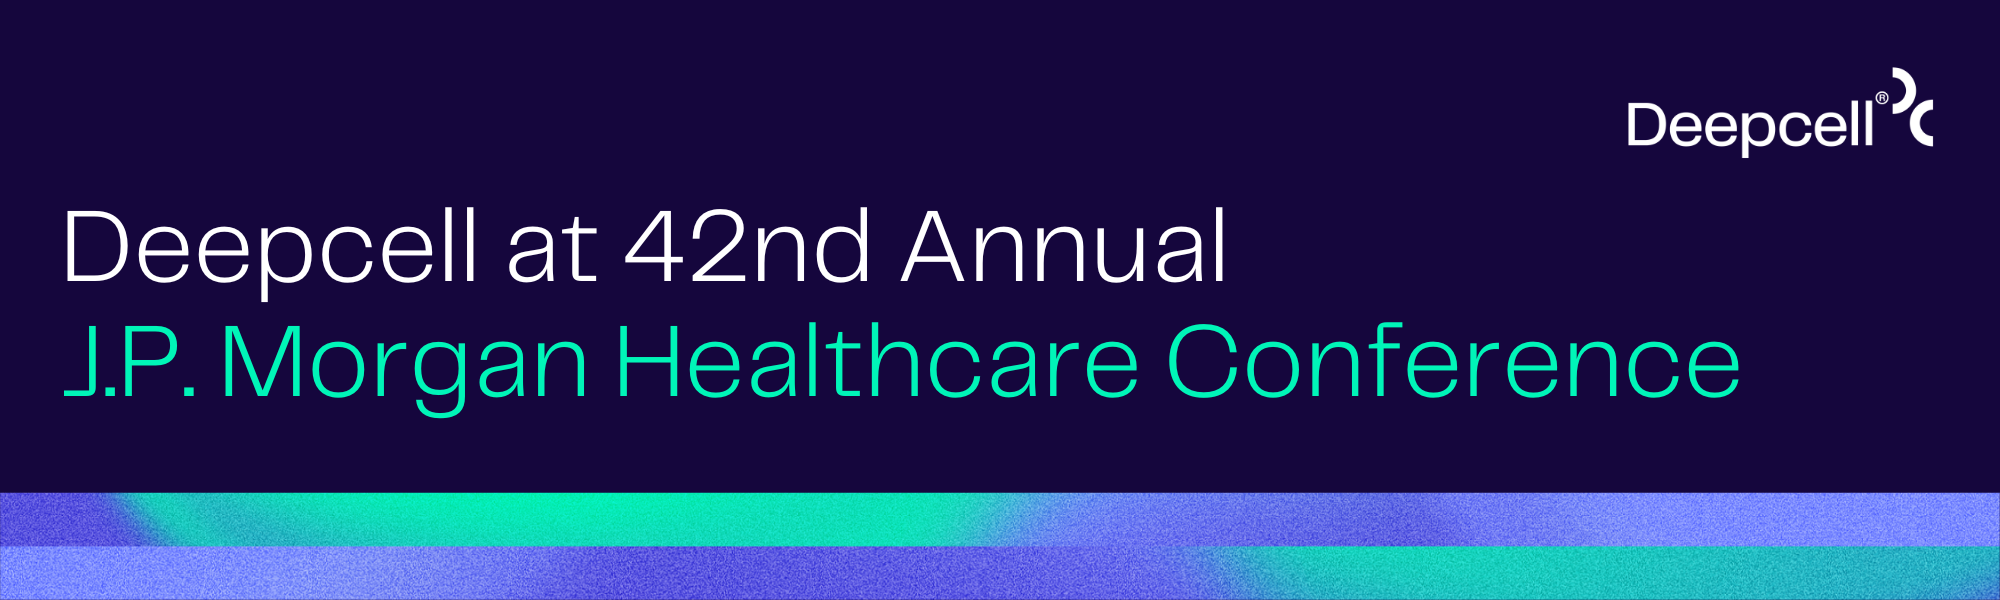 Deepcell at 42nd Annual J.P. Morgan Healthcare Conference